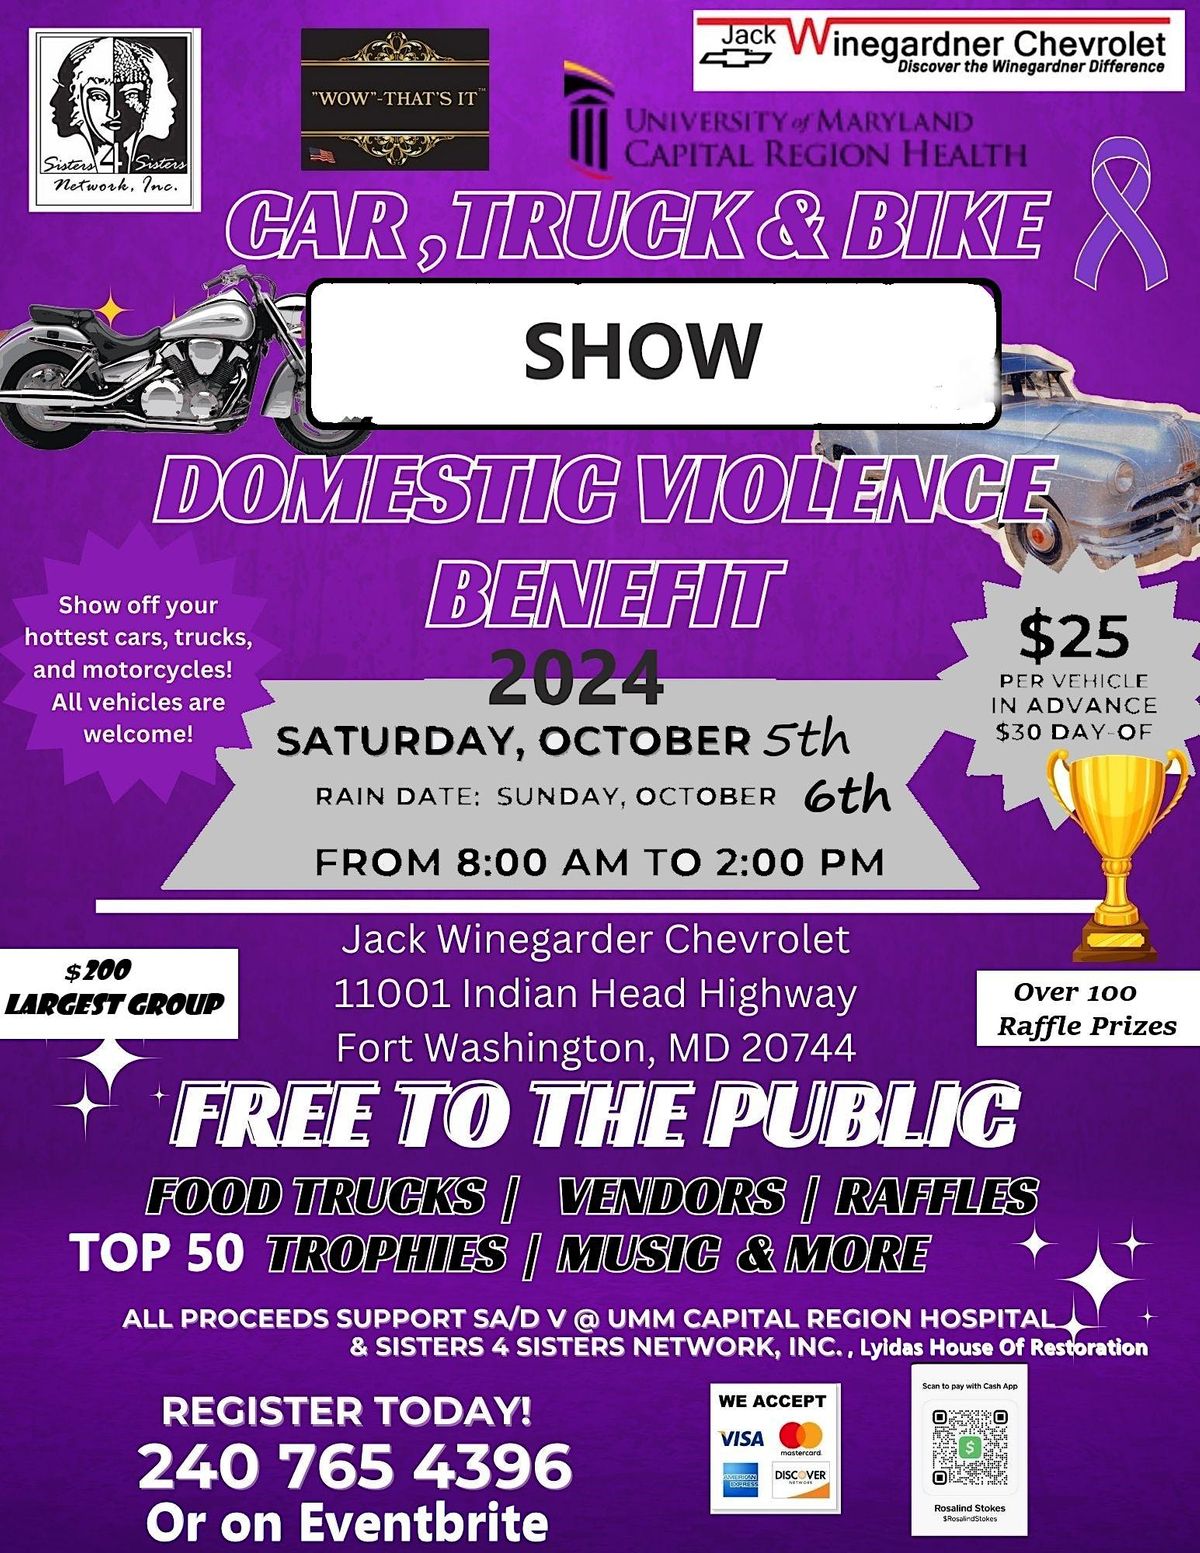 CAR-TRUCK-BIKE    SHOW TO FIGHT DOMESTIC VIOLENCE